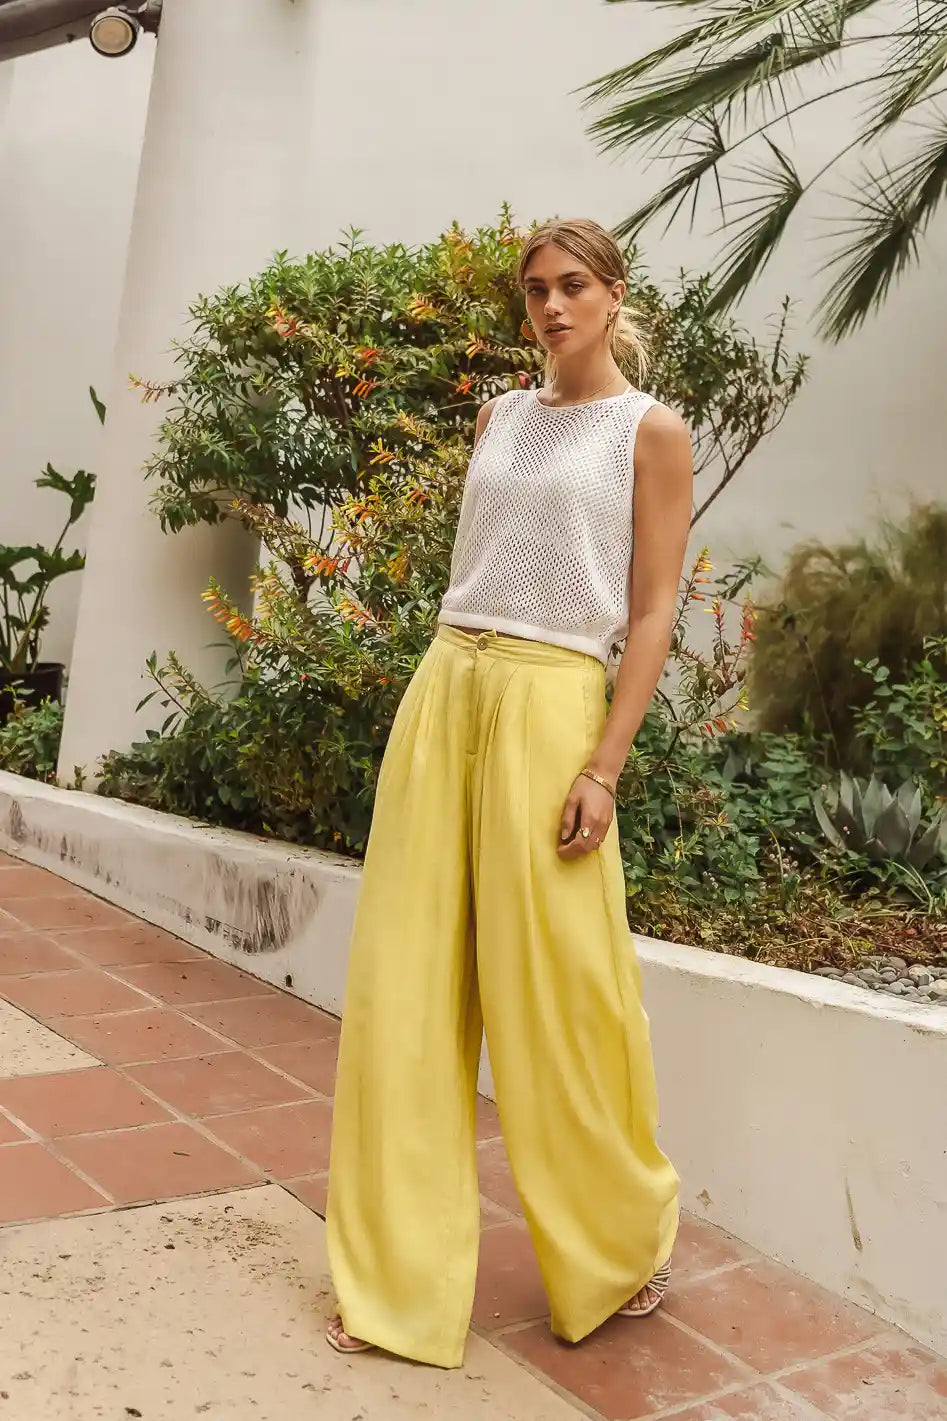 Culottes Are the Comeback Trend We've All Been Waiting For—Here Are 15 Cute  Pairs To Shop Now